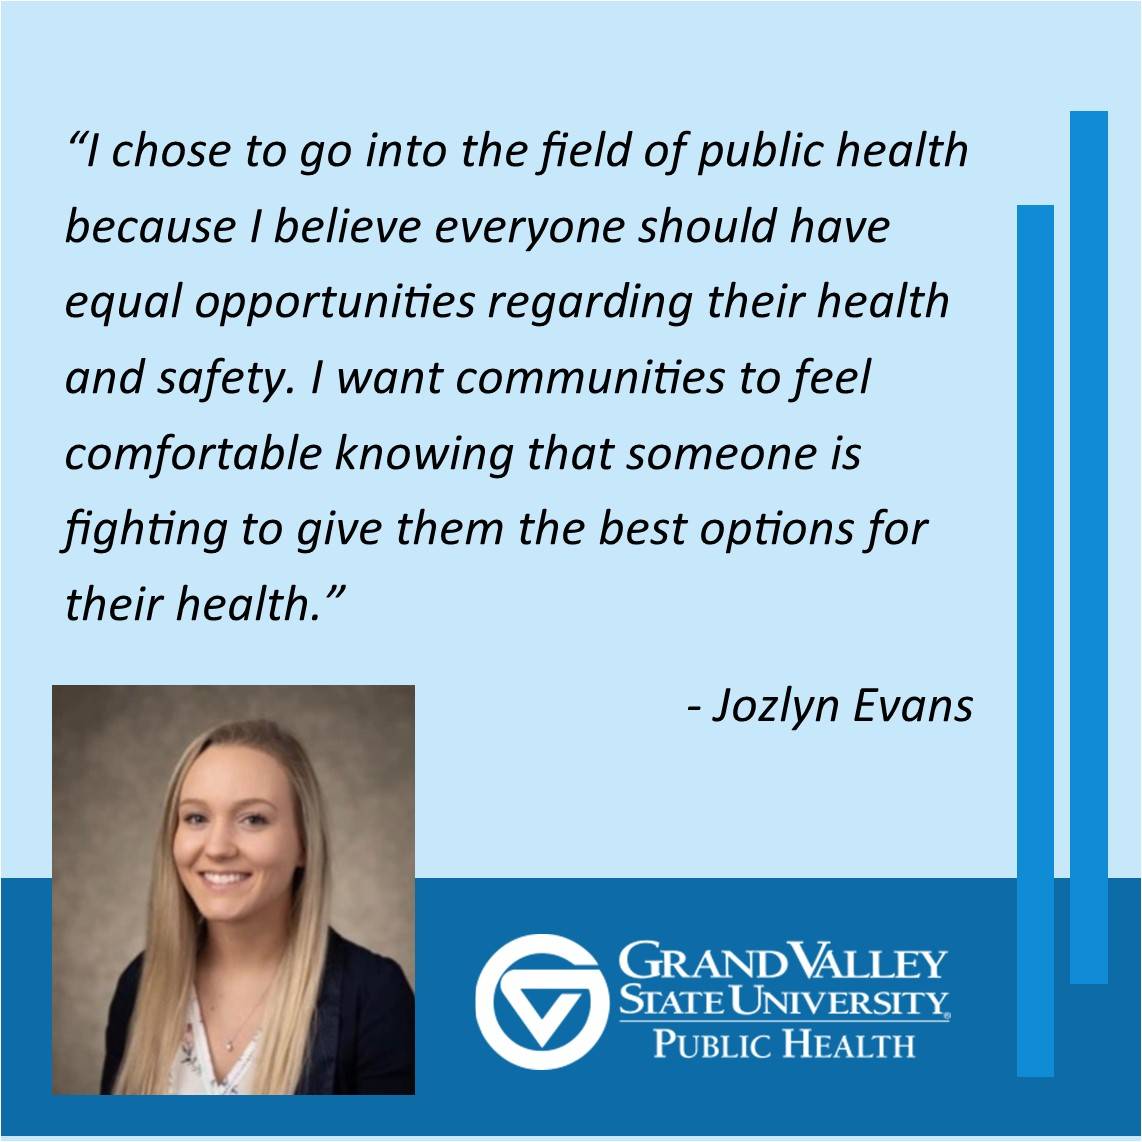 Jozlyn Evans '21, says, "I chose to go into the field of public health because I believe everyone should have equal opportunities regarding their health and safety. I want communities to feel comfortable knowing that someone is fighting to give them the best options for their health."